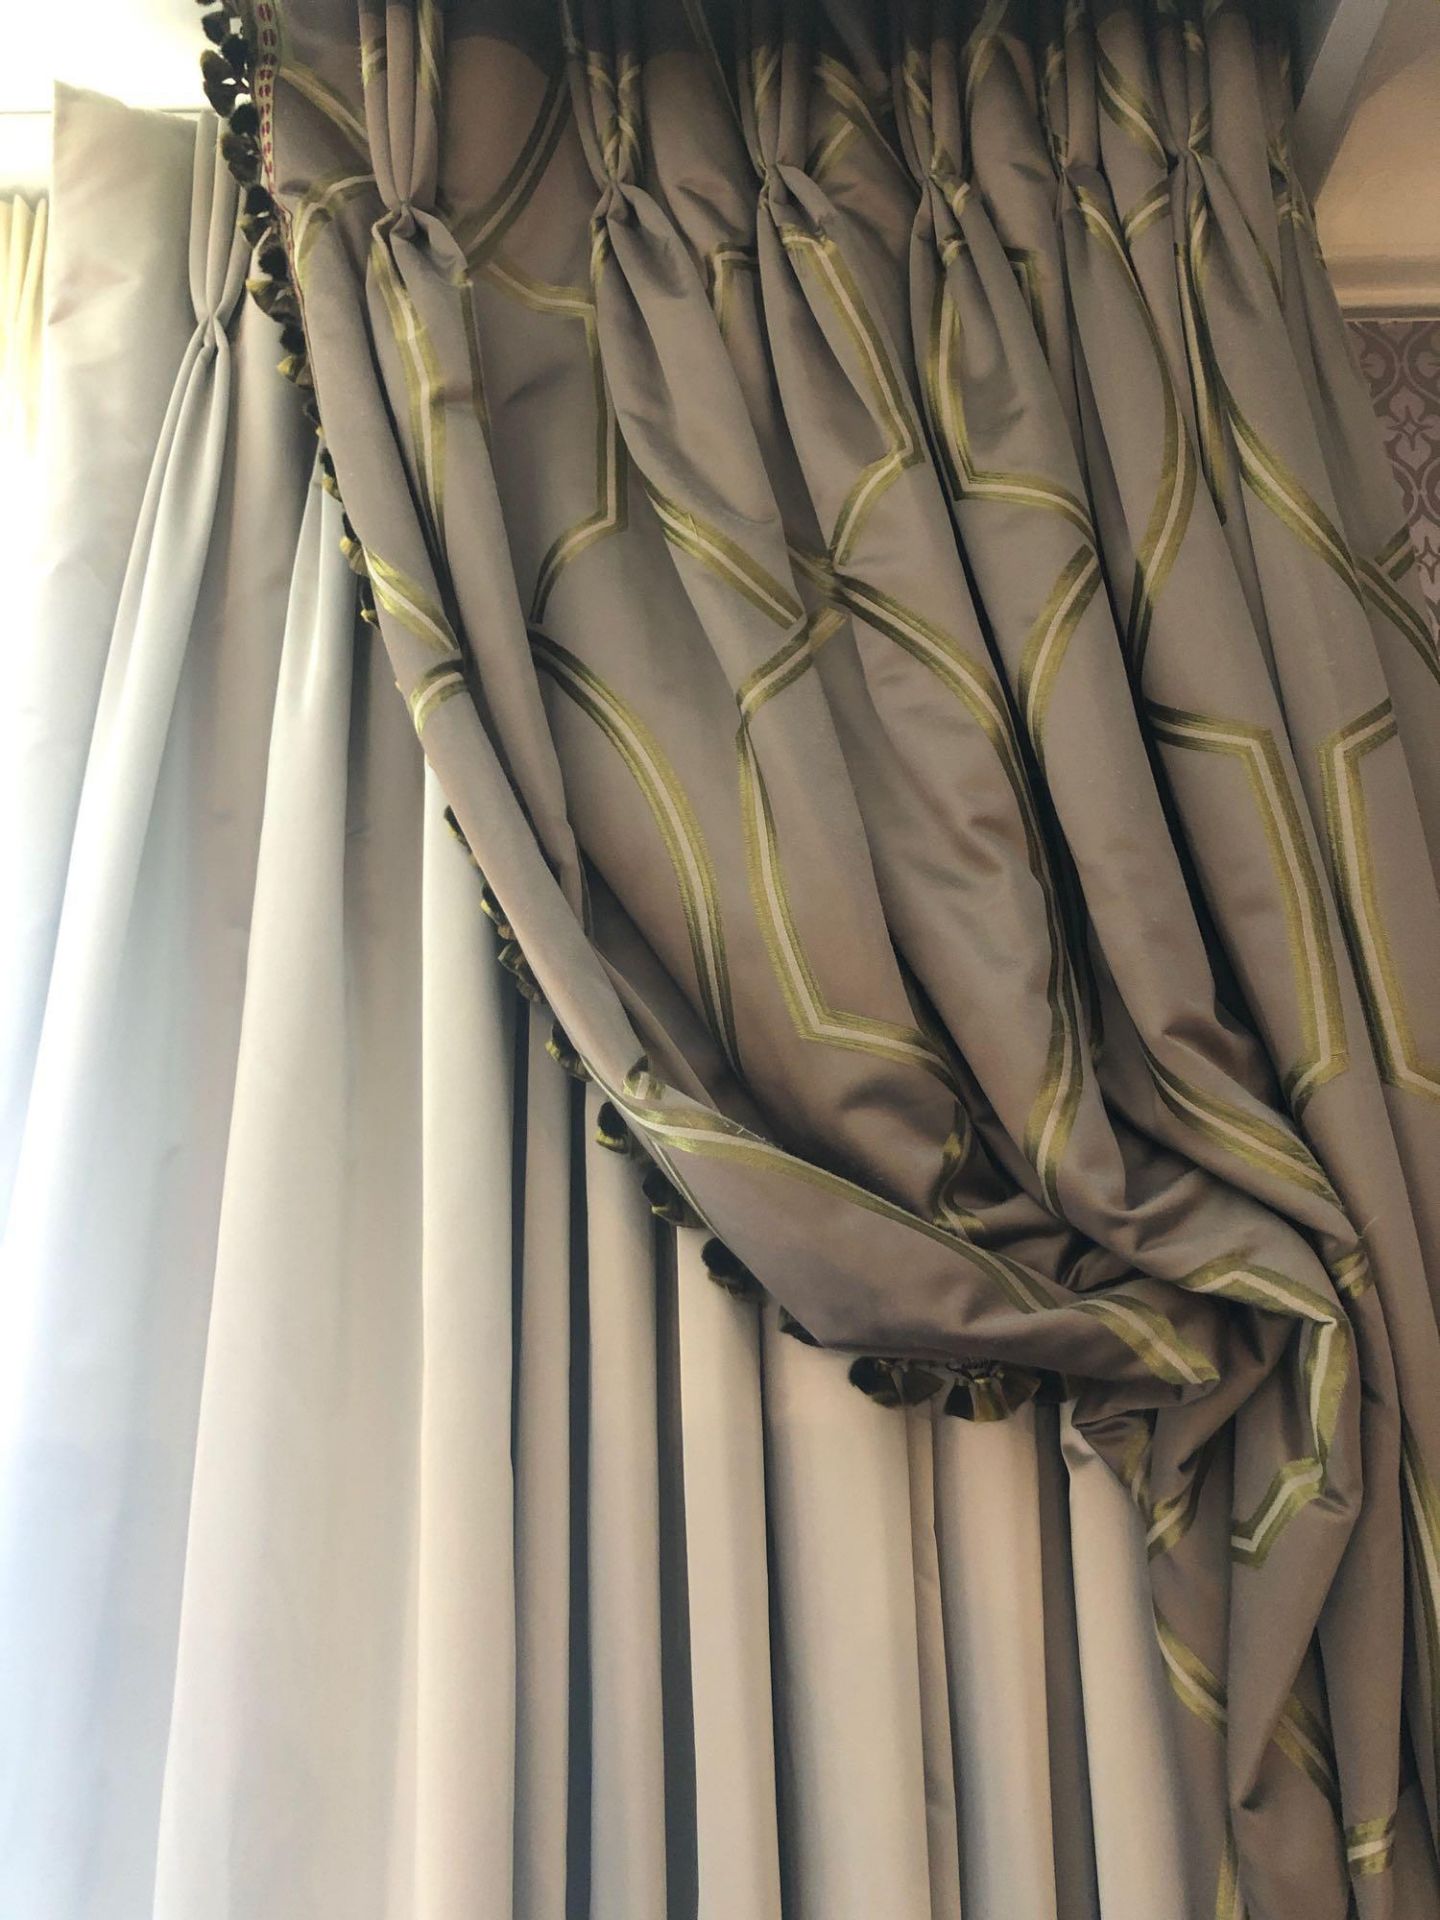 A Pair Of Silk Drapes And Jabots In Gold And Green Patterned 265 x 235cm (Room 527) - Image 2 of 2